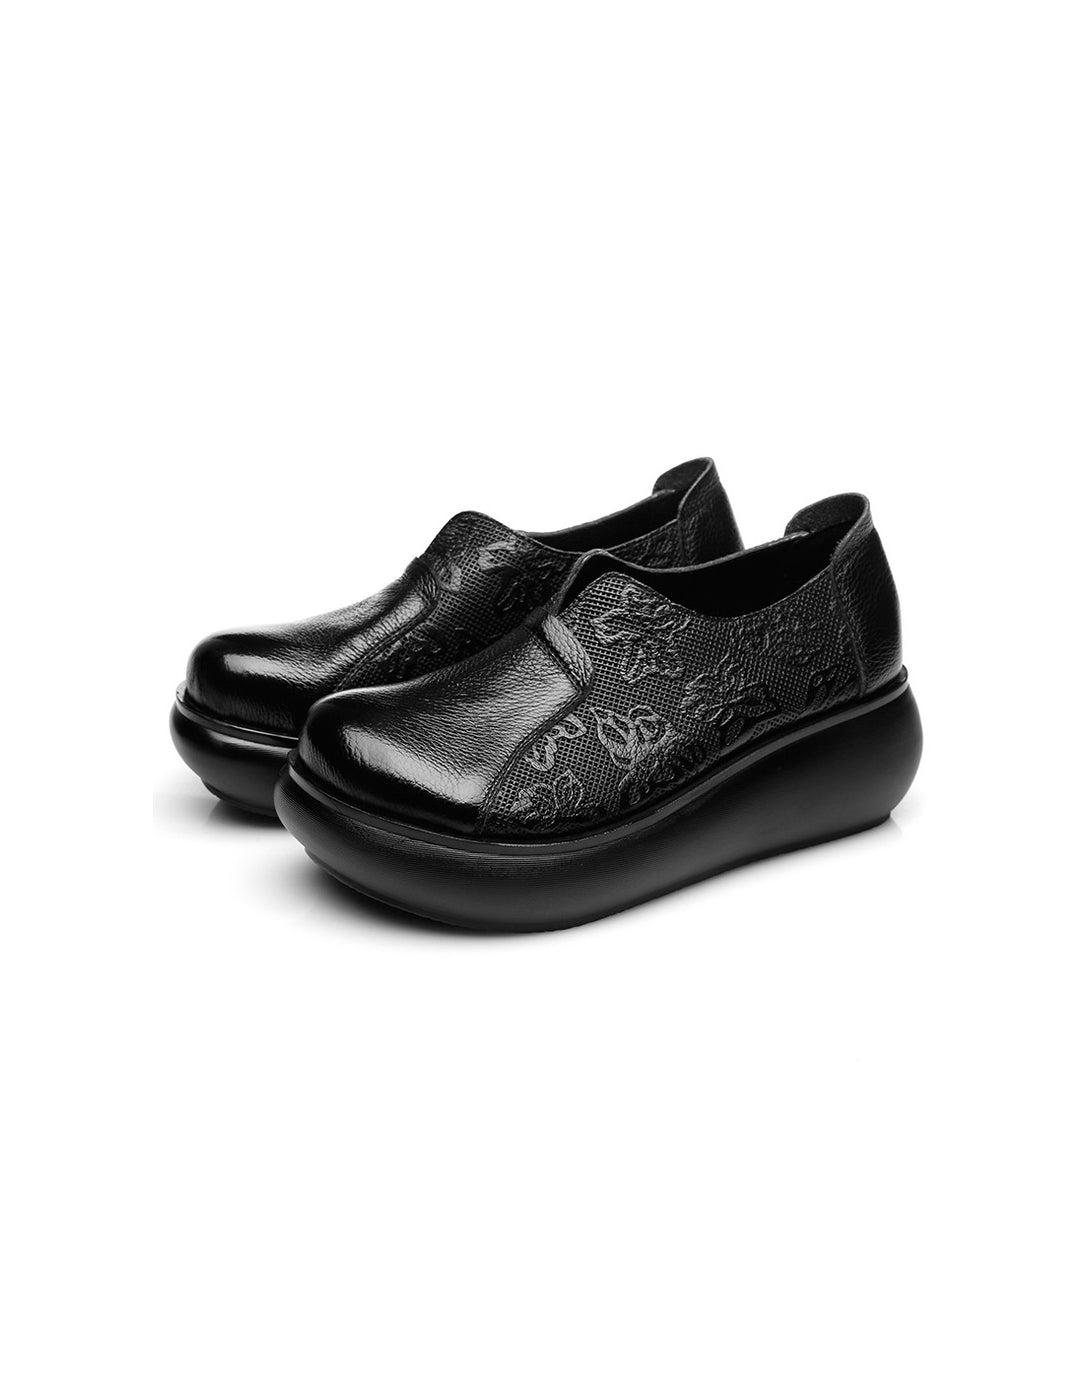 Embossed Handmade Leather Retro Wedge Shoes Spring — Obiono